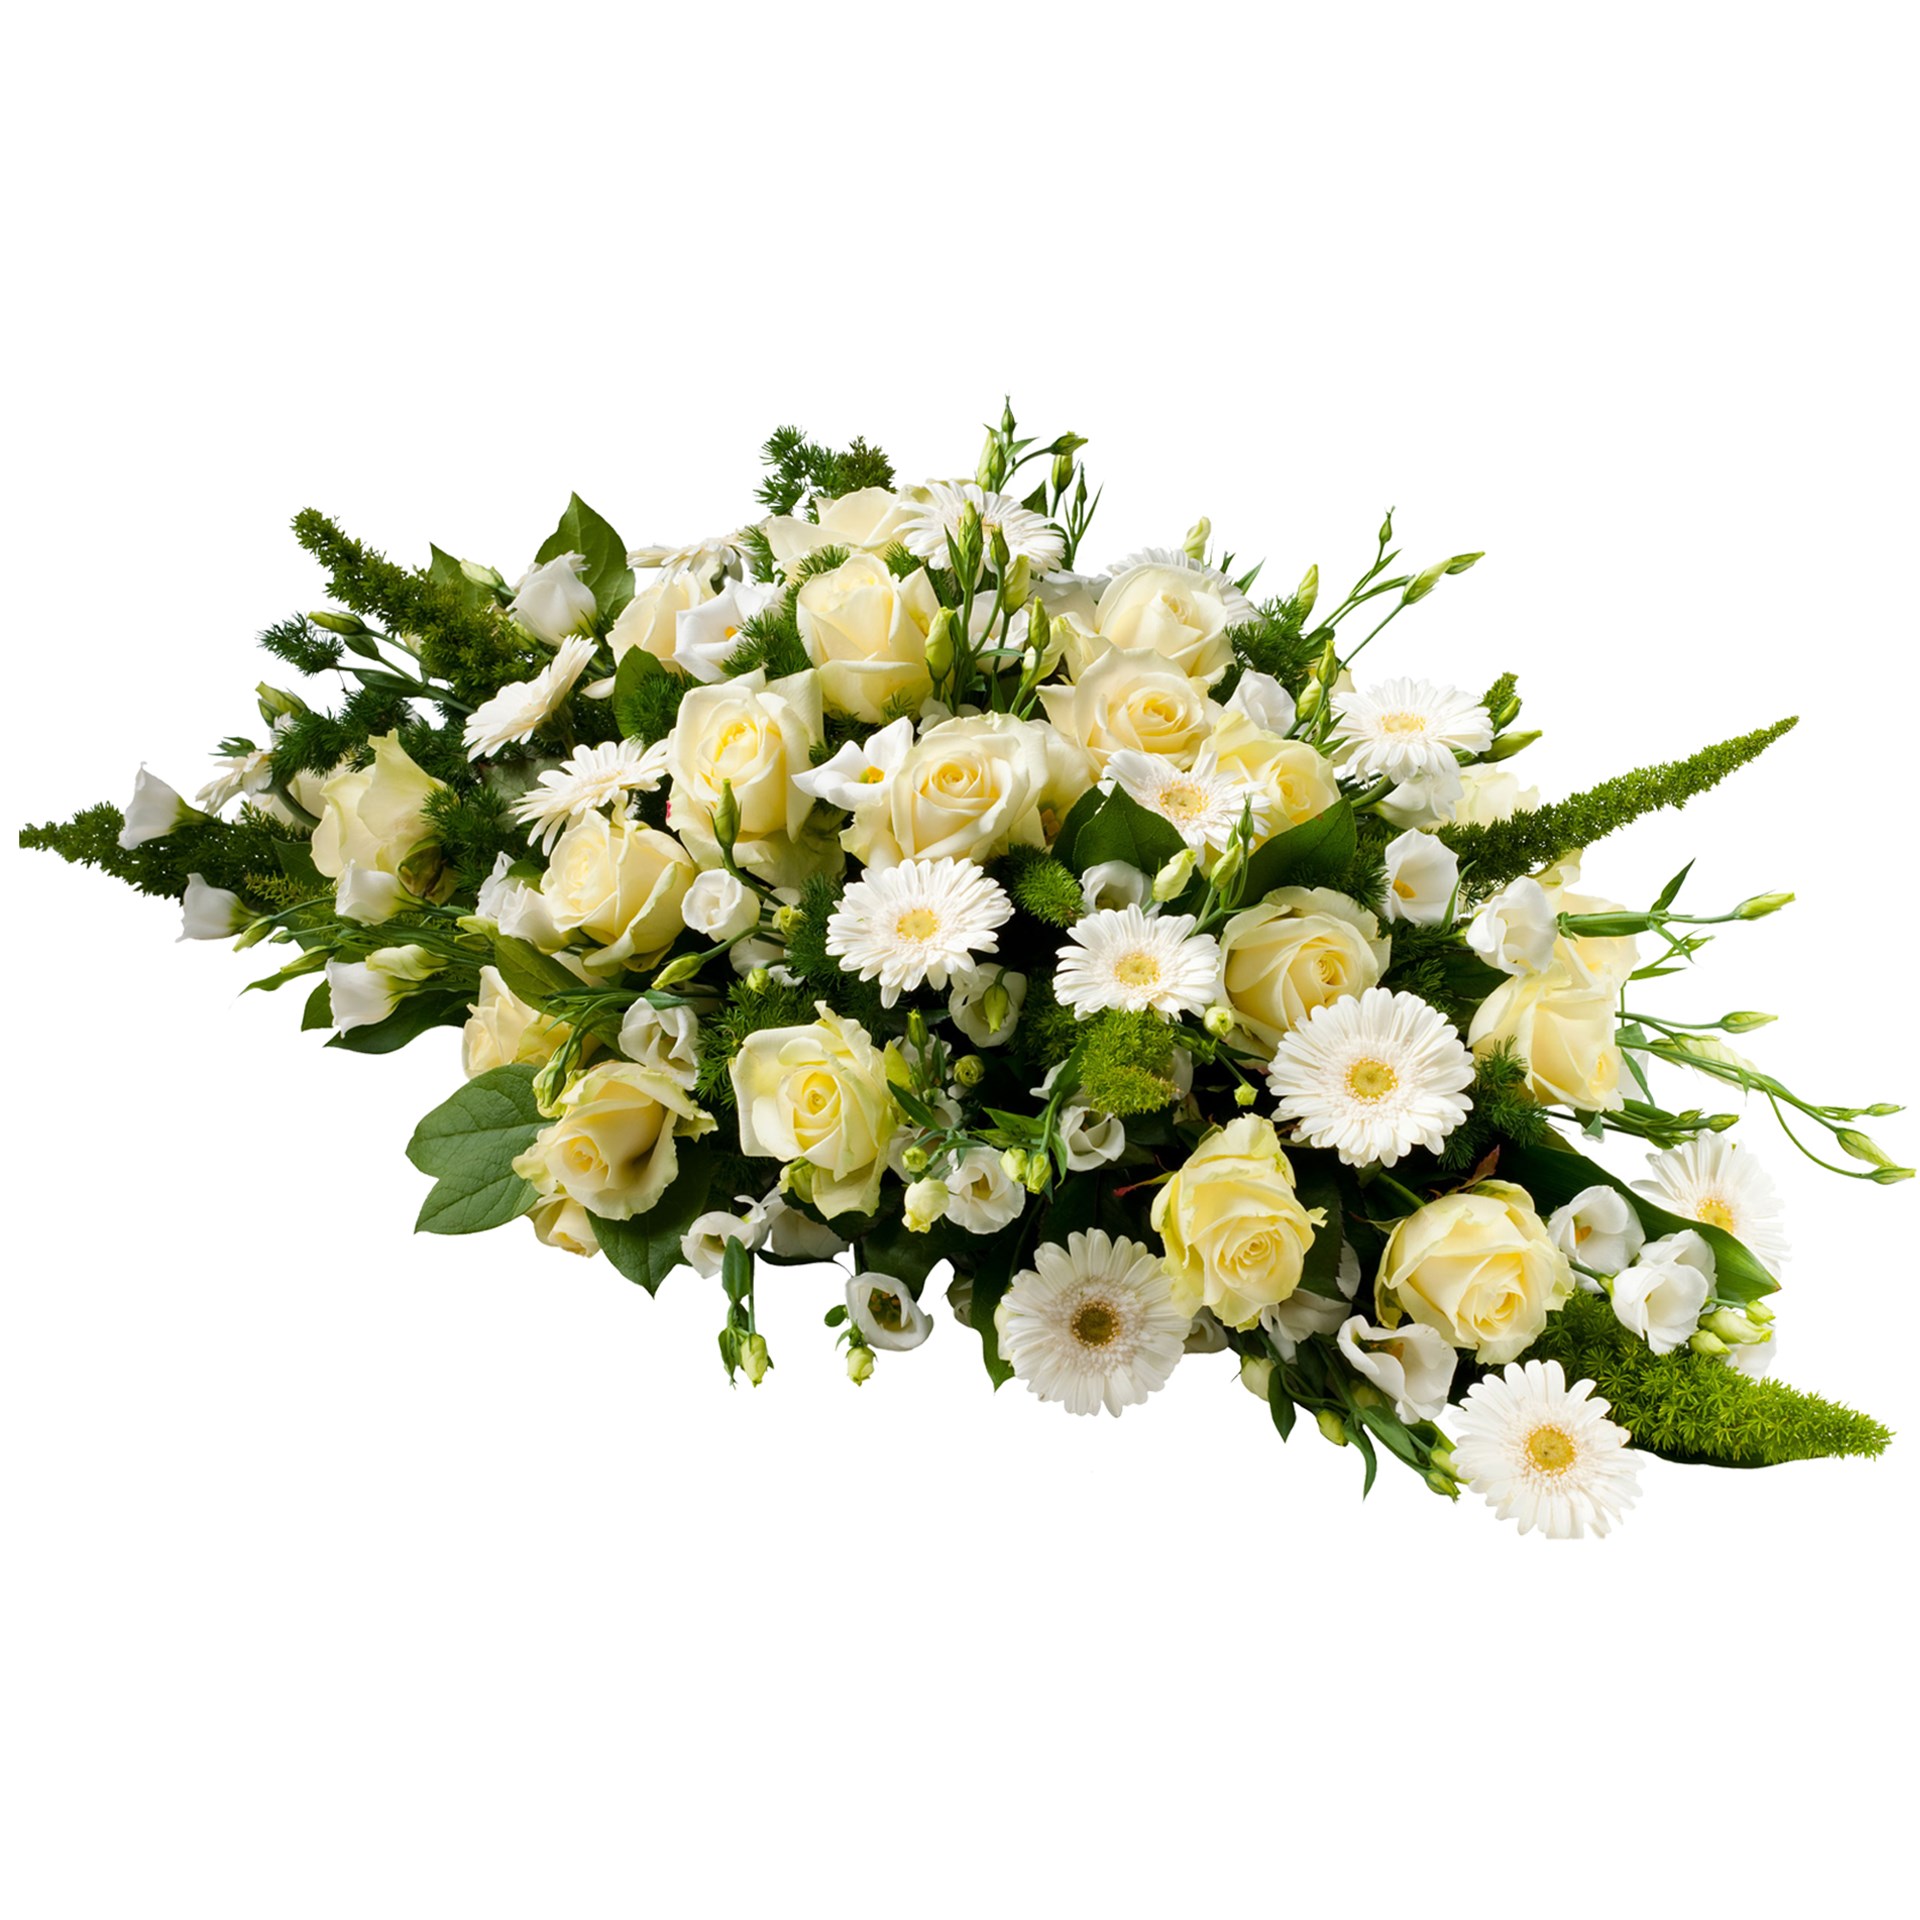 product image for Funeral arrangement